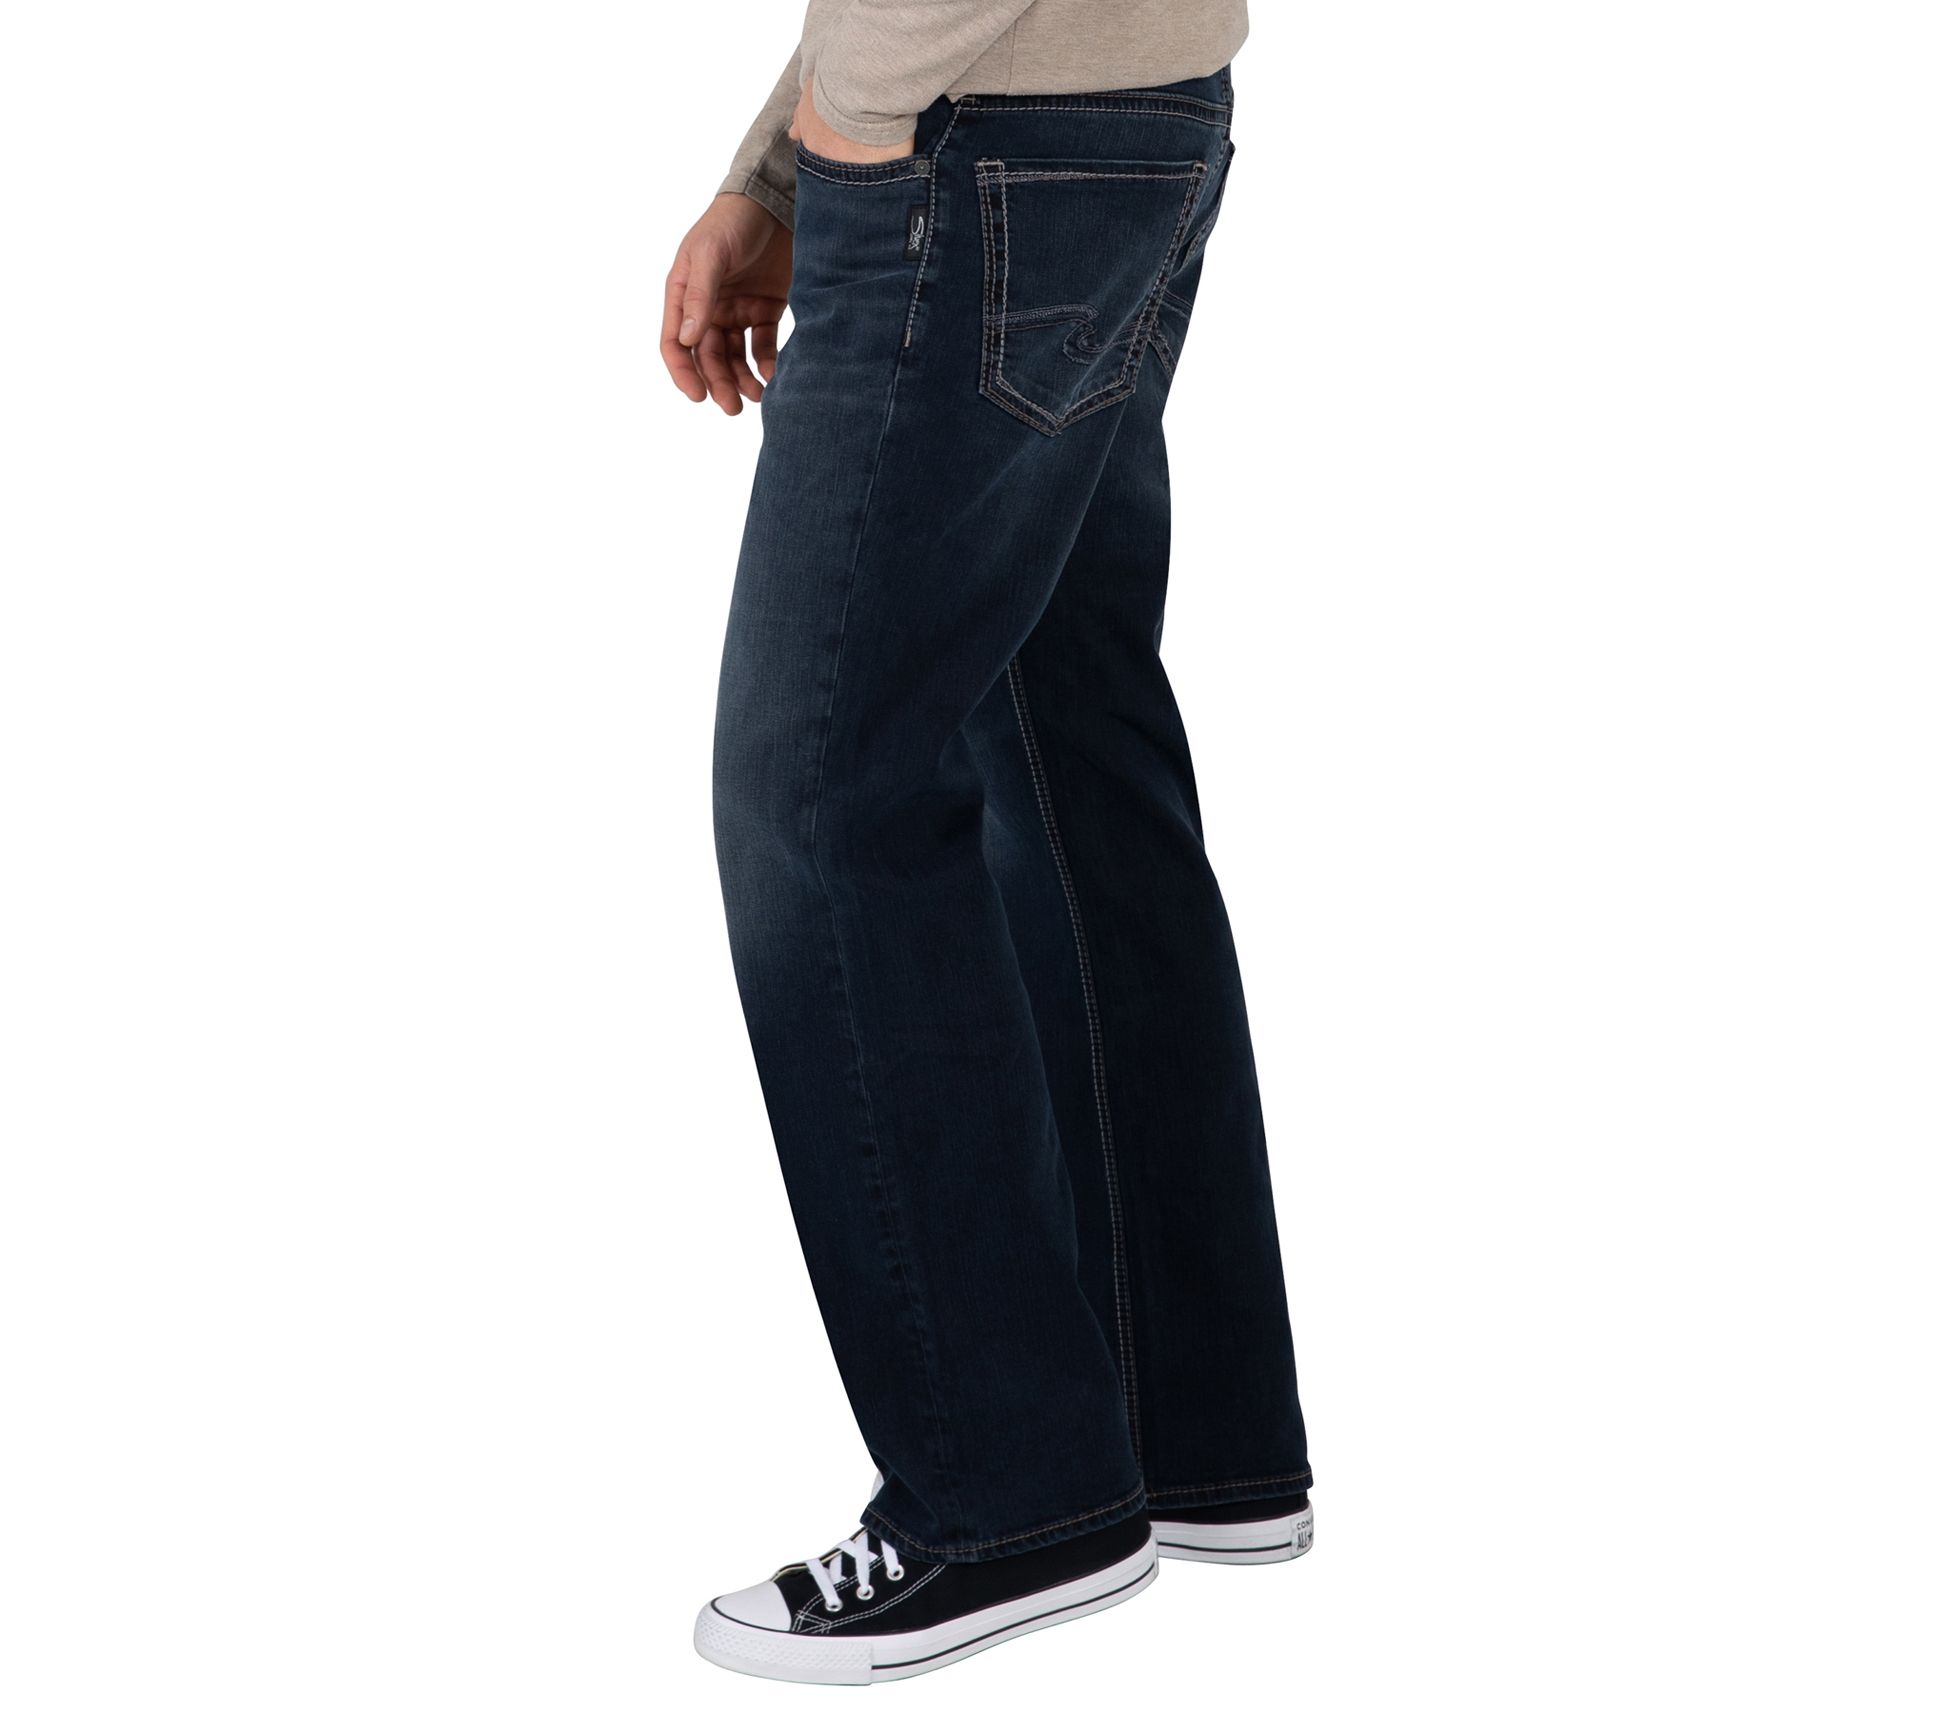 Silver Jeans Co. Zac Relaxed Fit Straight Leg Jeans-EBB419 - QVC.com